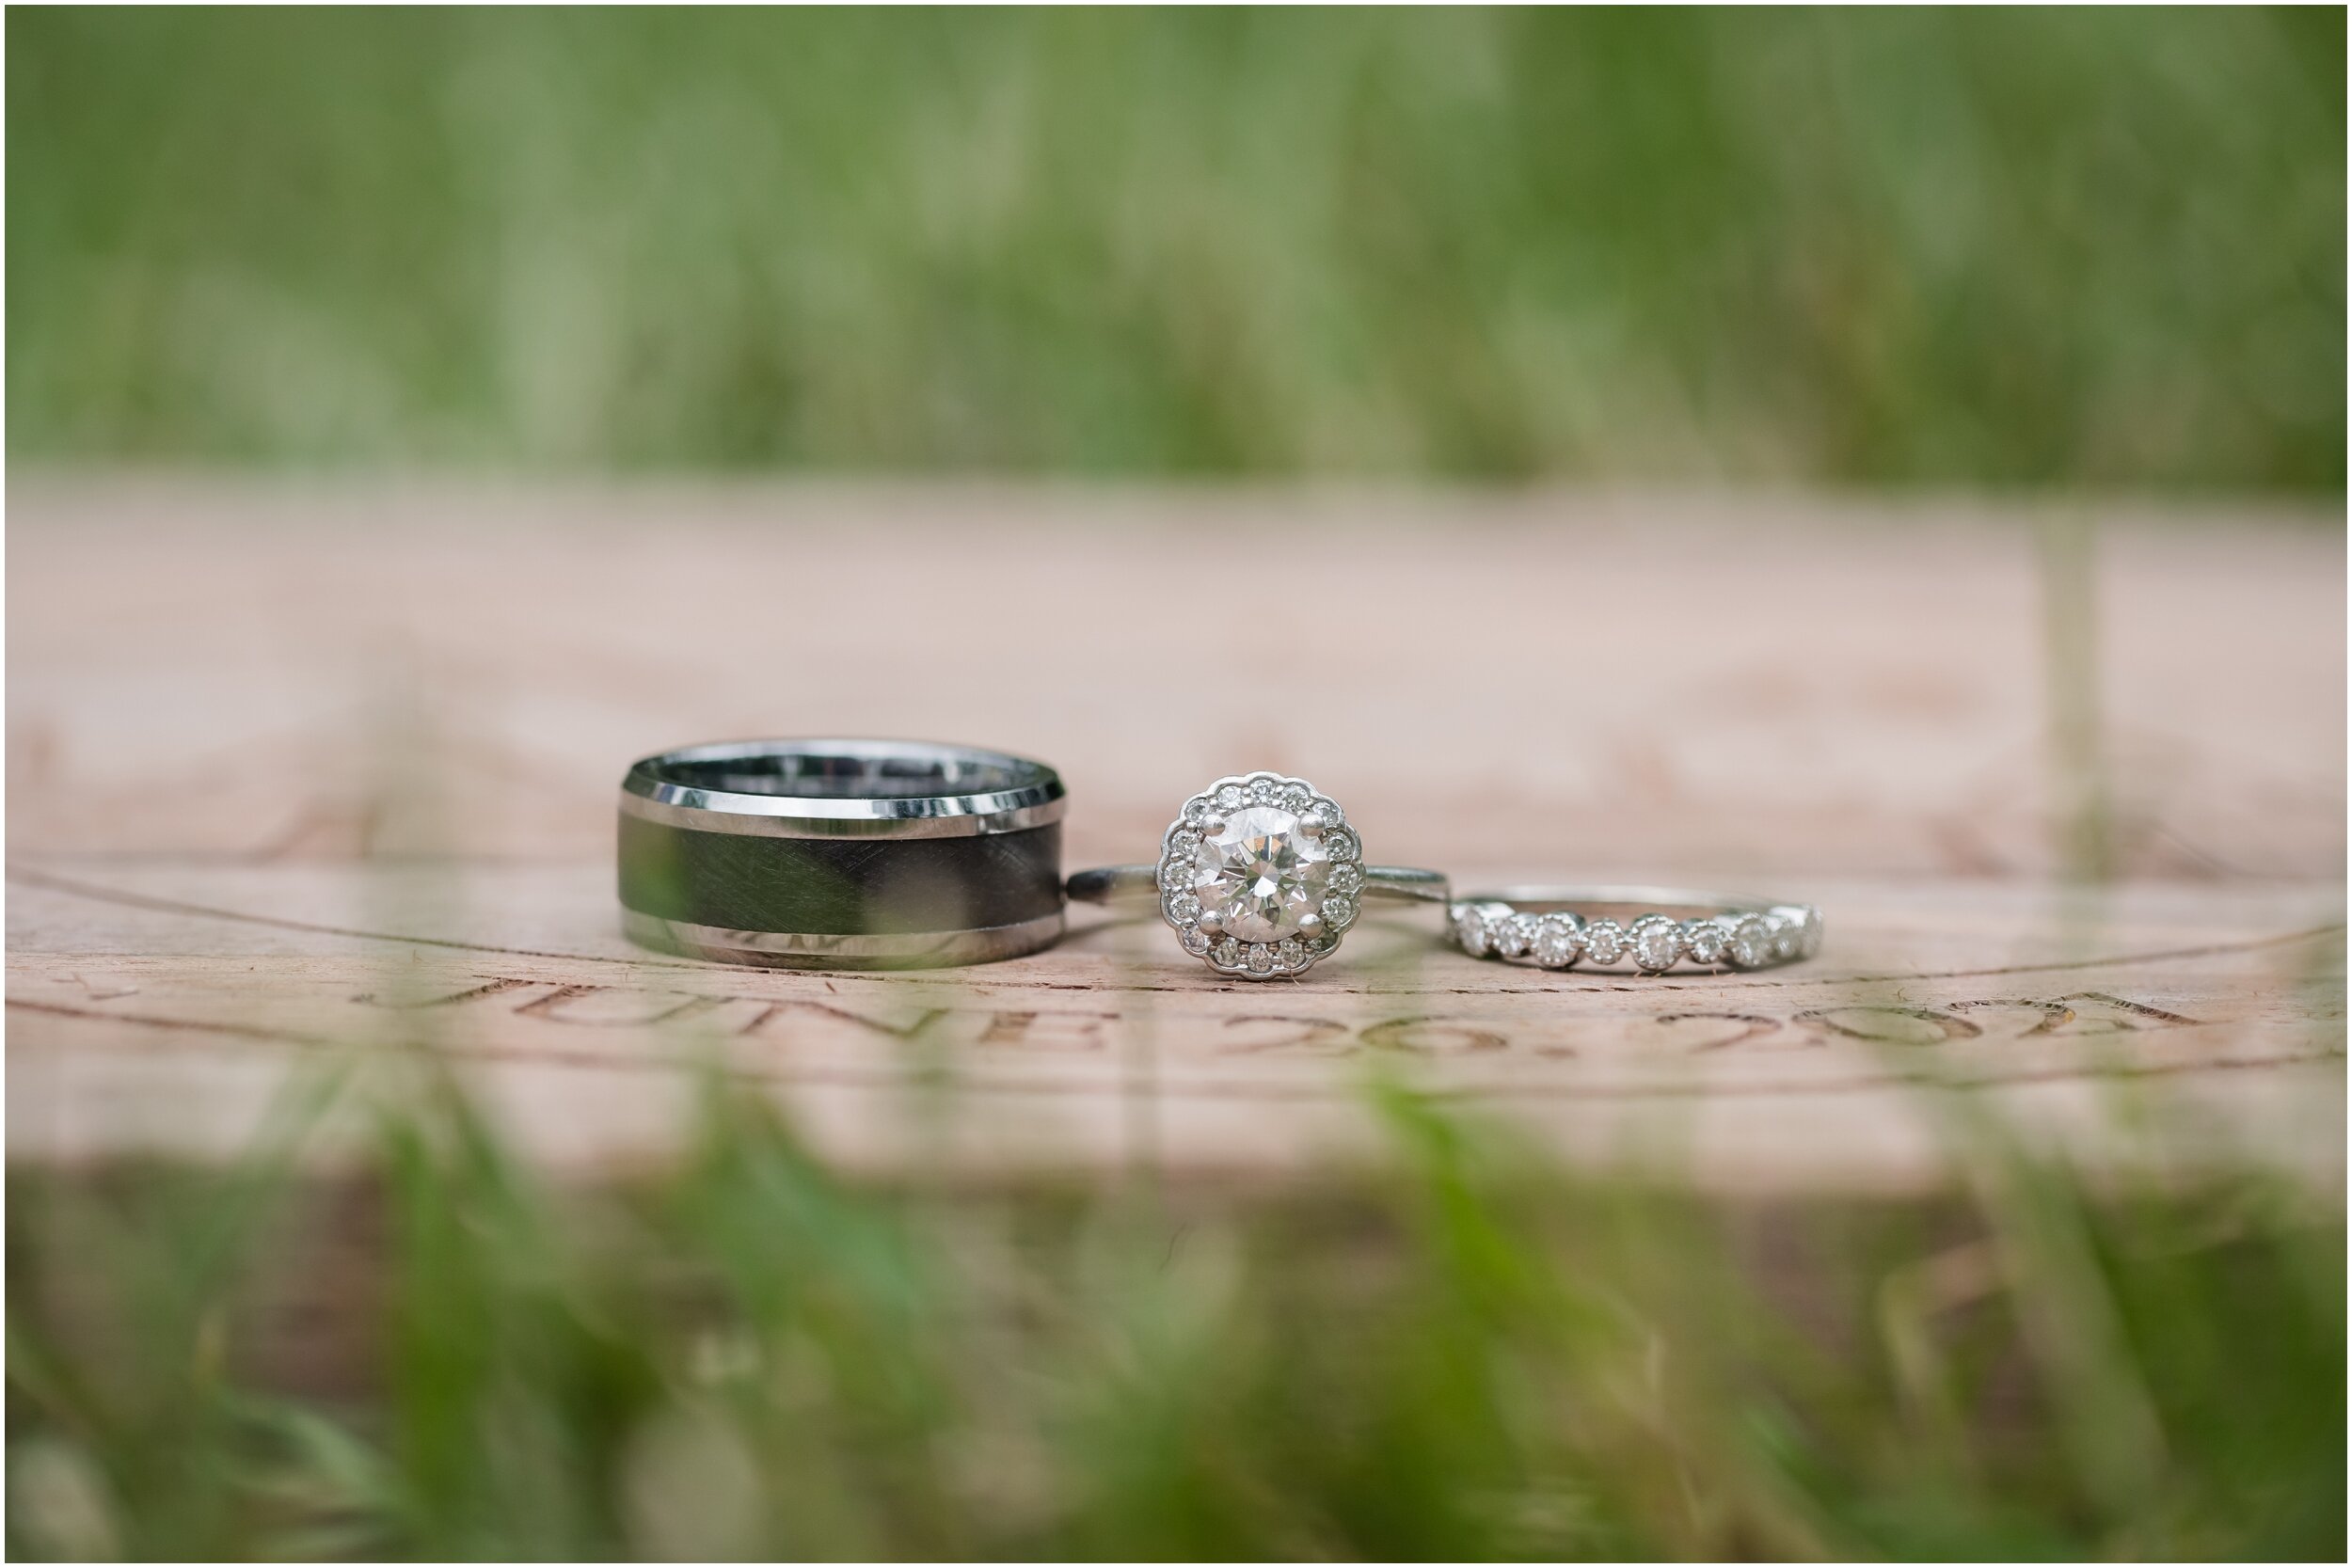 Wedding rings in the grass